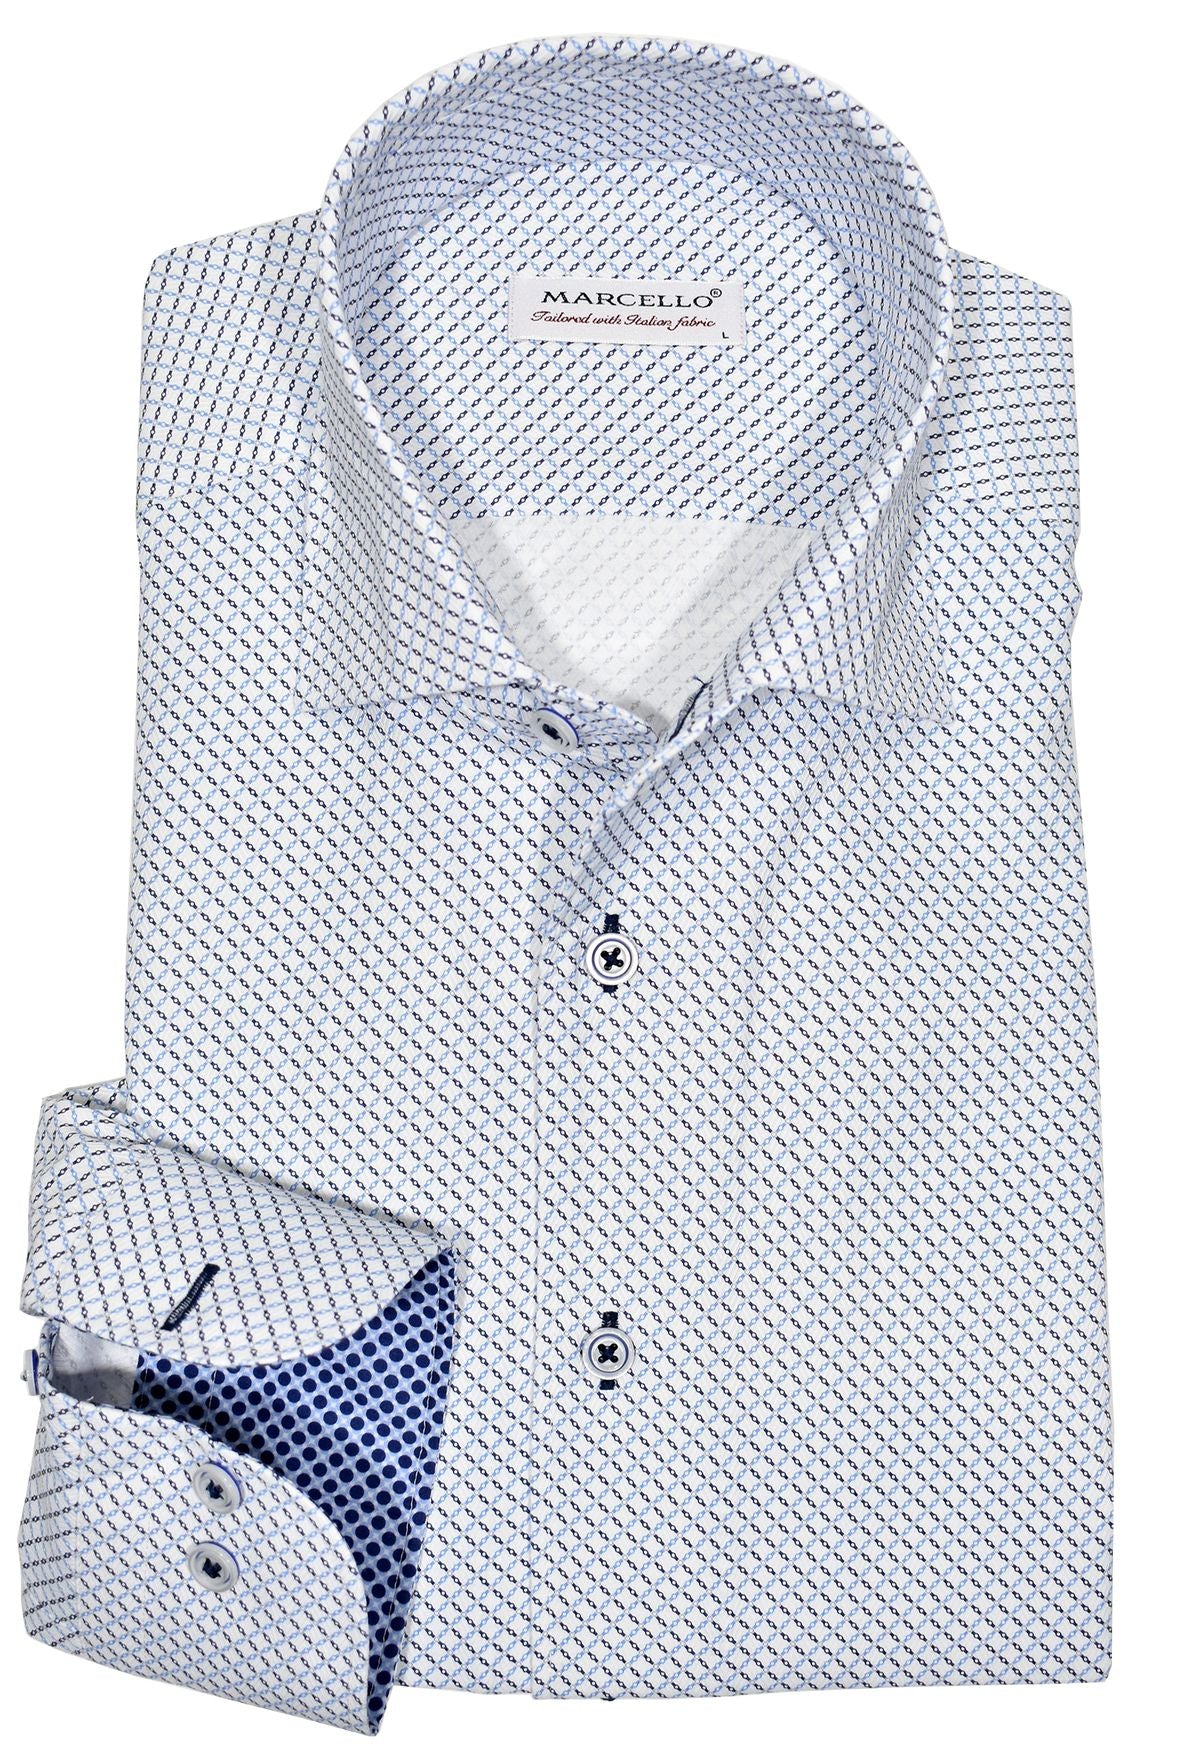 Exclusive Marcello 1 Piece Roll Collar Shirt.  The one piece roll collar stands perfectly and looks fantastic alone or under a sport coat.  The two color blue diamond pattern coupled with a rich fabric creates a sophisticated look to set you apart from the rest.  Hand selected buttons, two button cuff placket for the best look when rolling up the cuffs and enhanced stitch detailing.  Classic shaped fit.